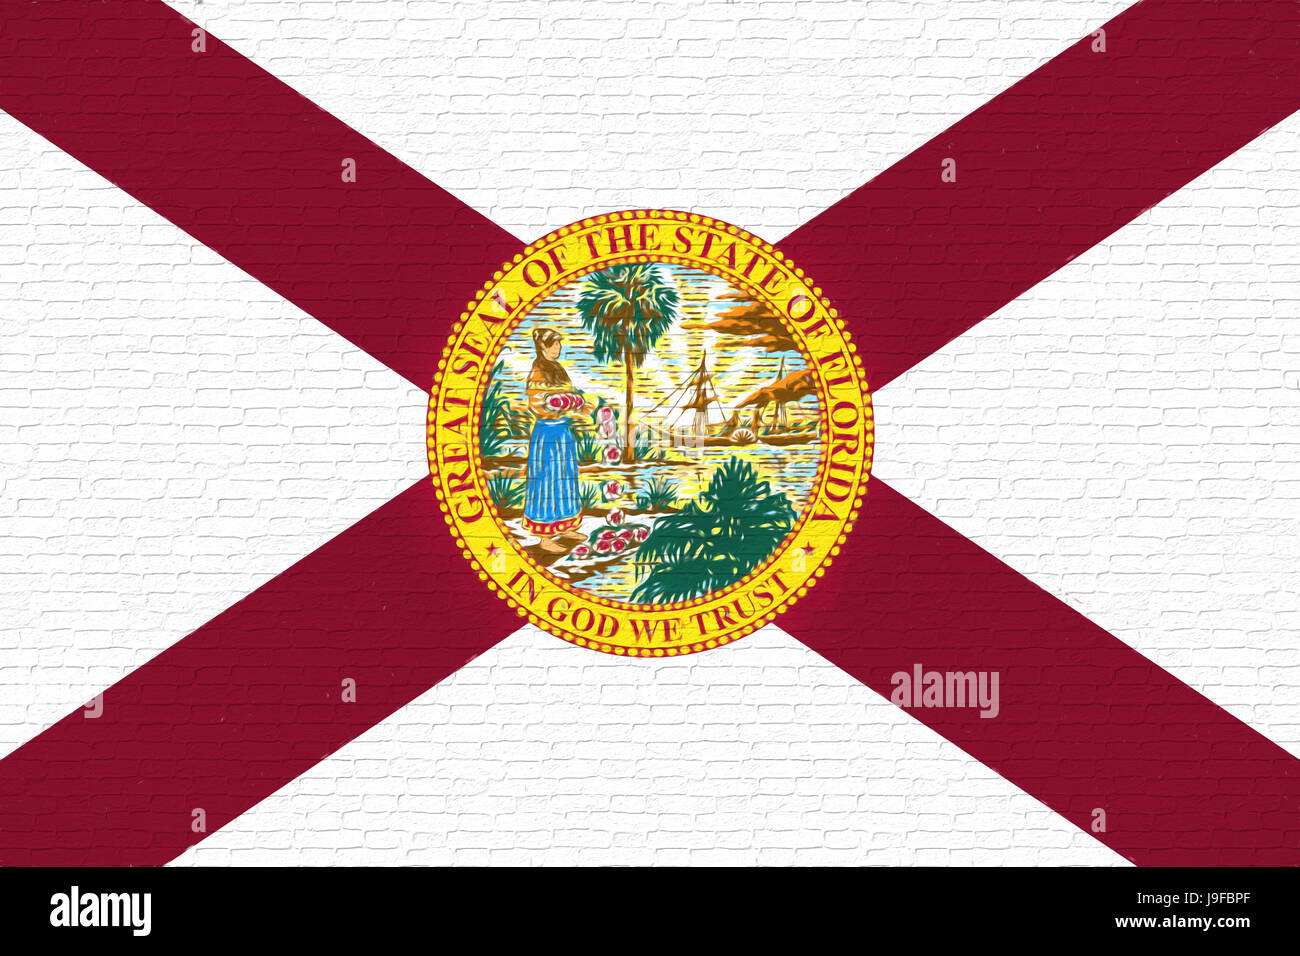 Illustration of the flag of Florida state in America looking like it is painted on a wall. Stock Photo